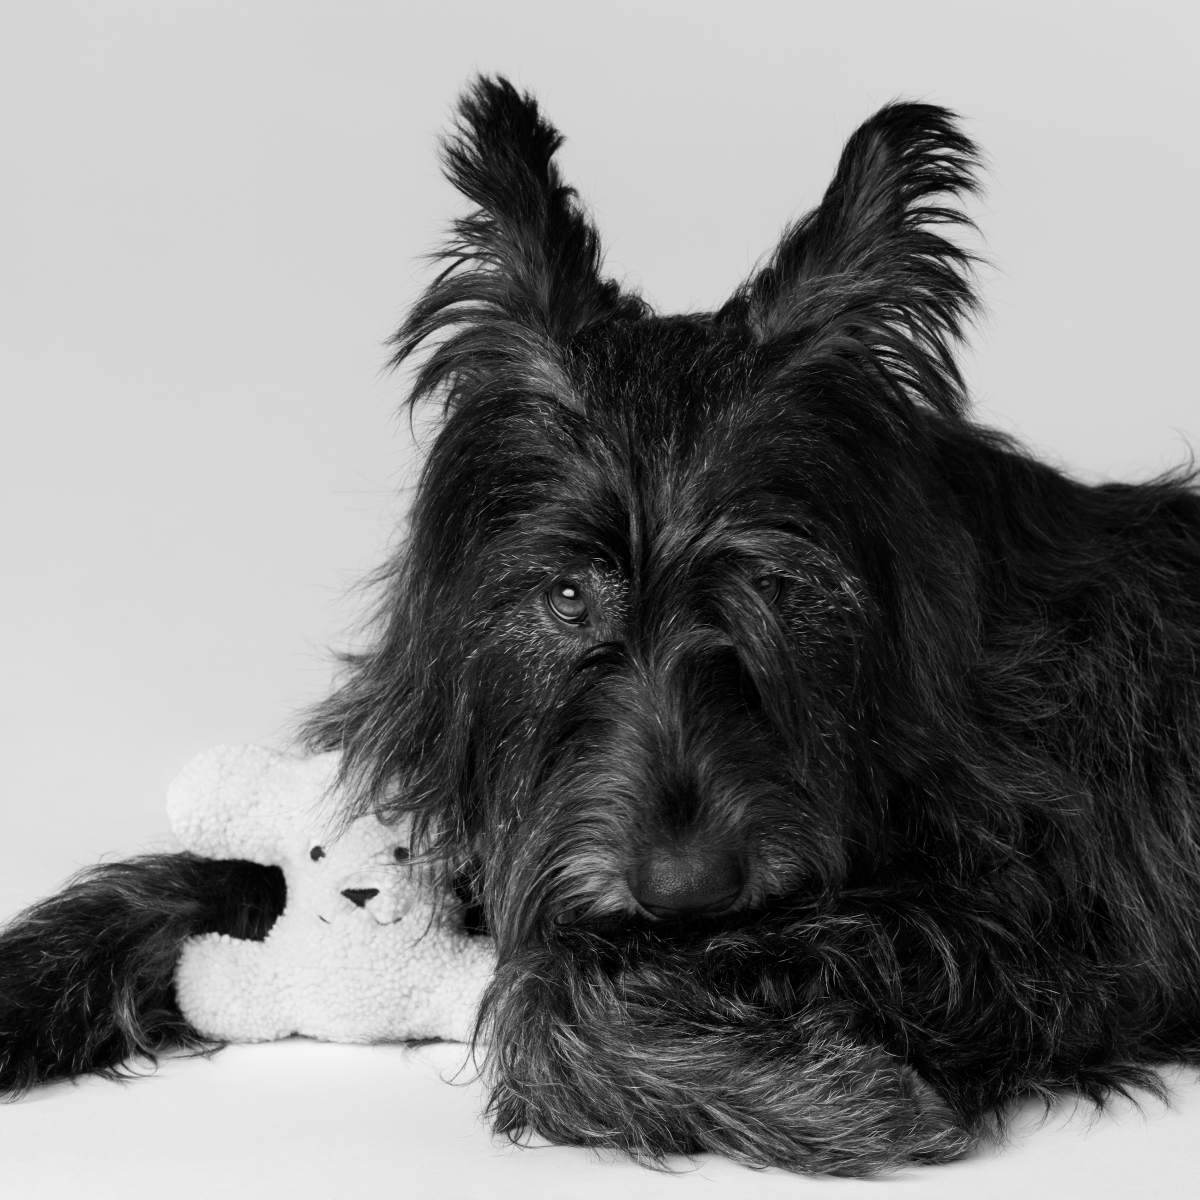 Celine Maison Launches Its New Dog Accessories Collection Campaign